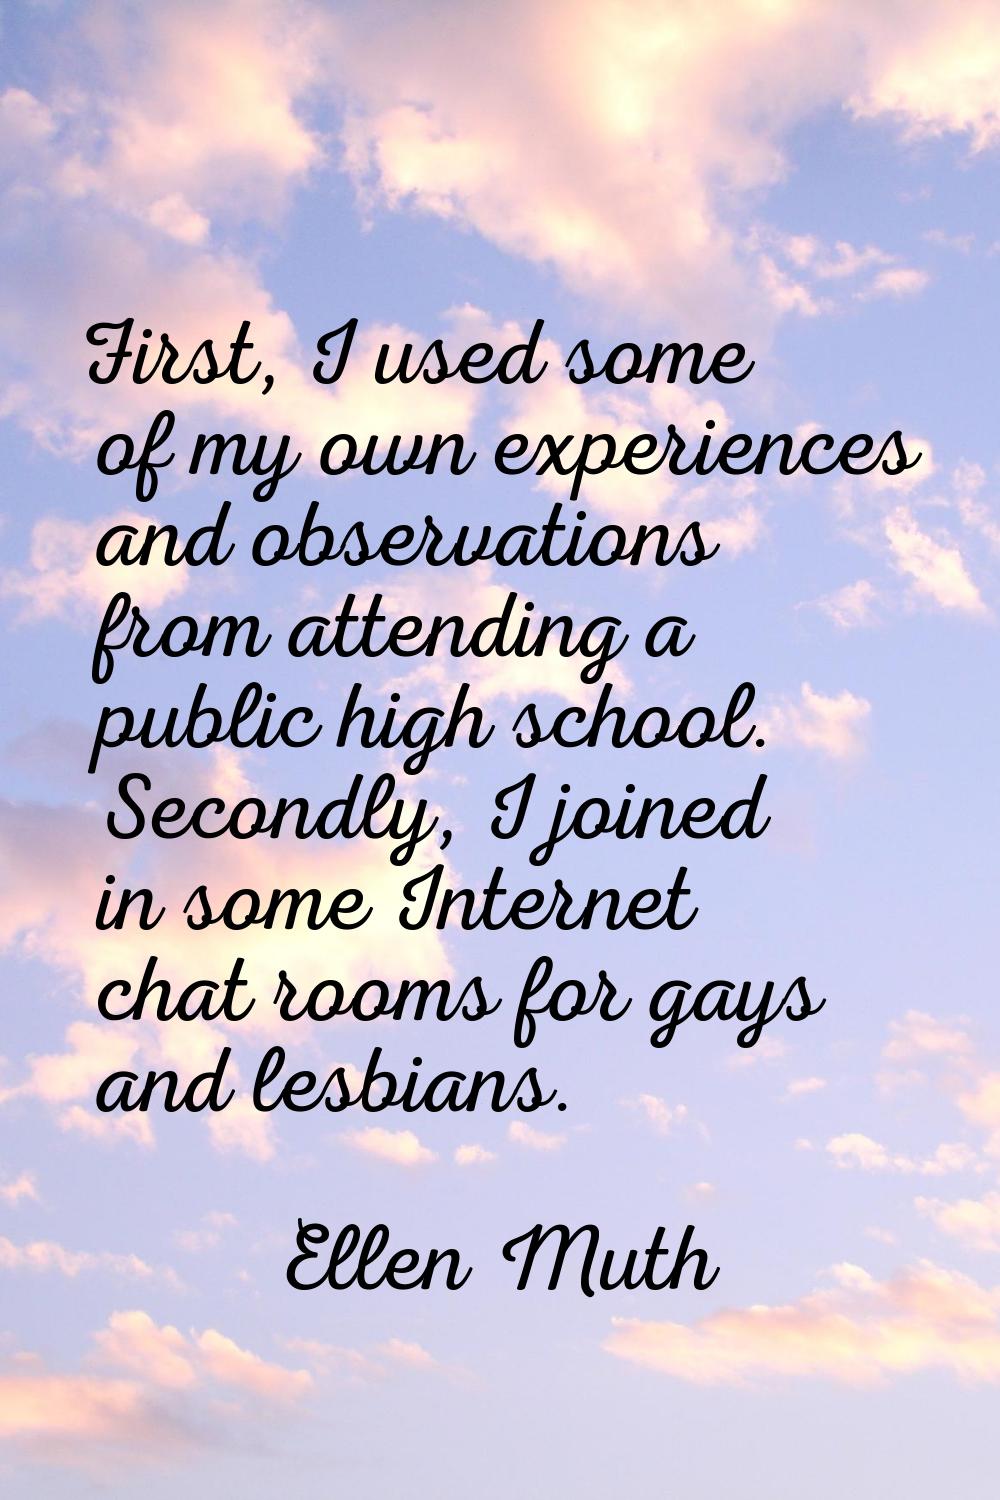 First, I used some of my own experiences and observations from attending a public high school. Seco